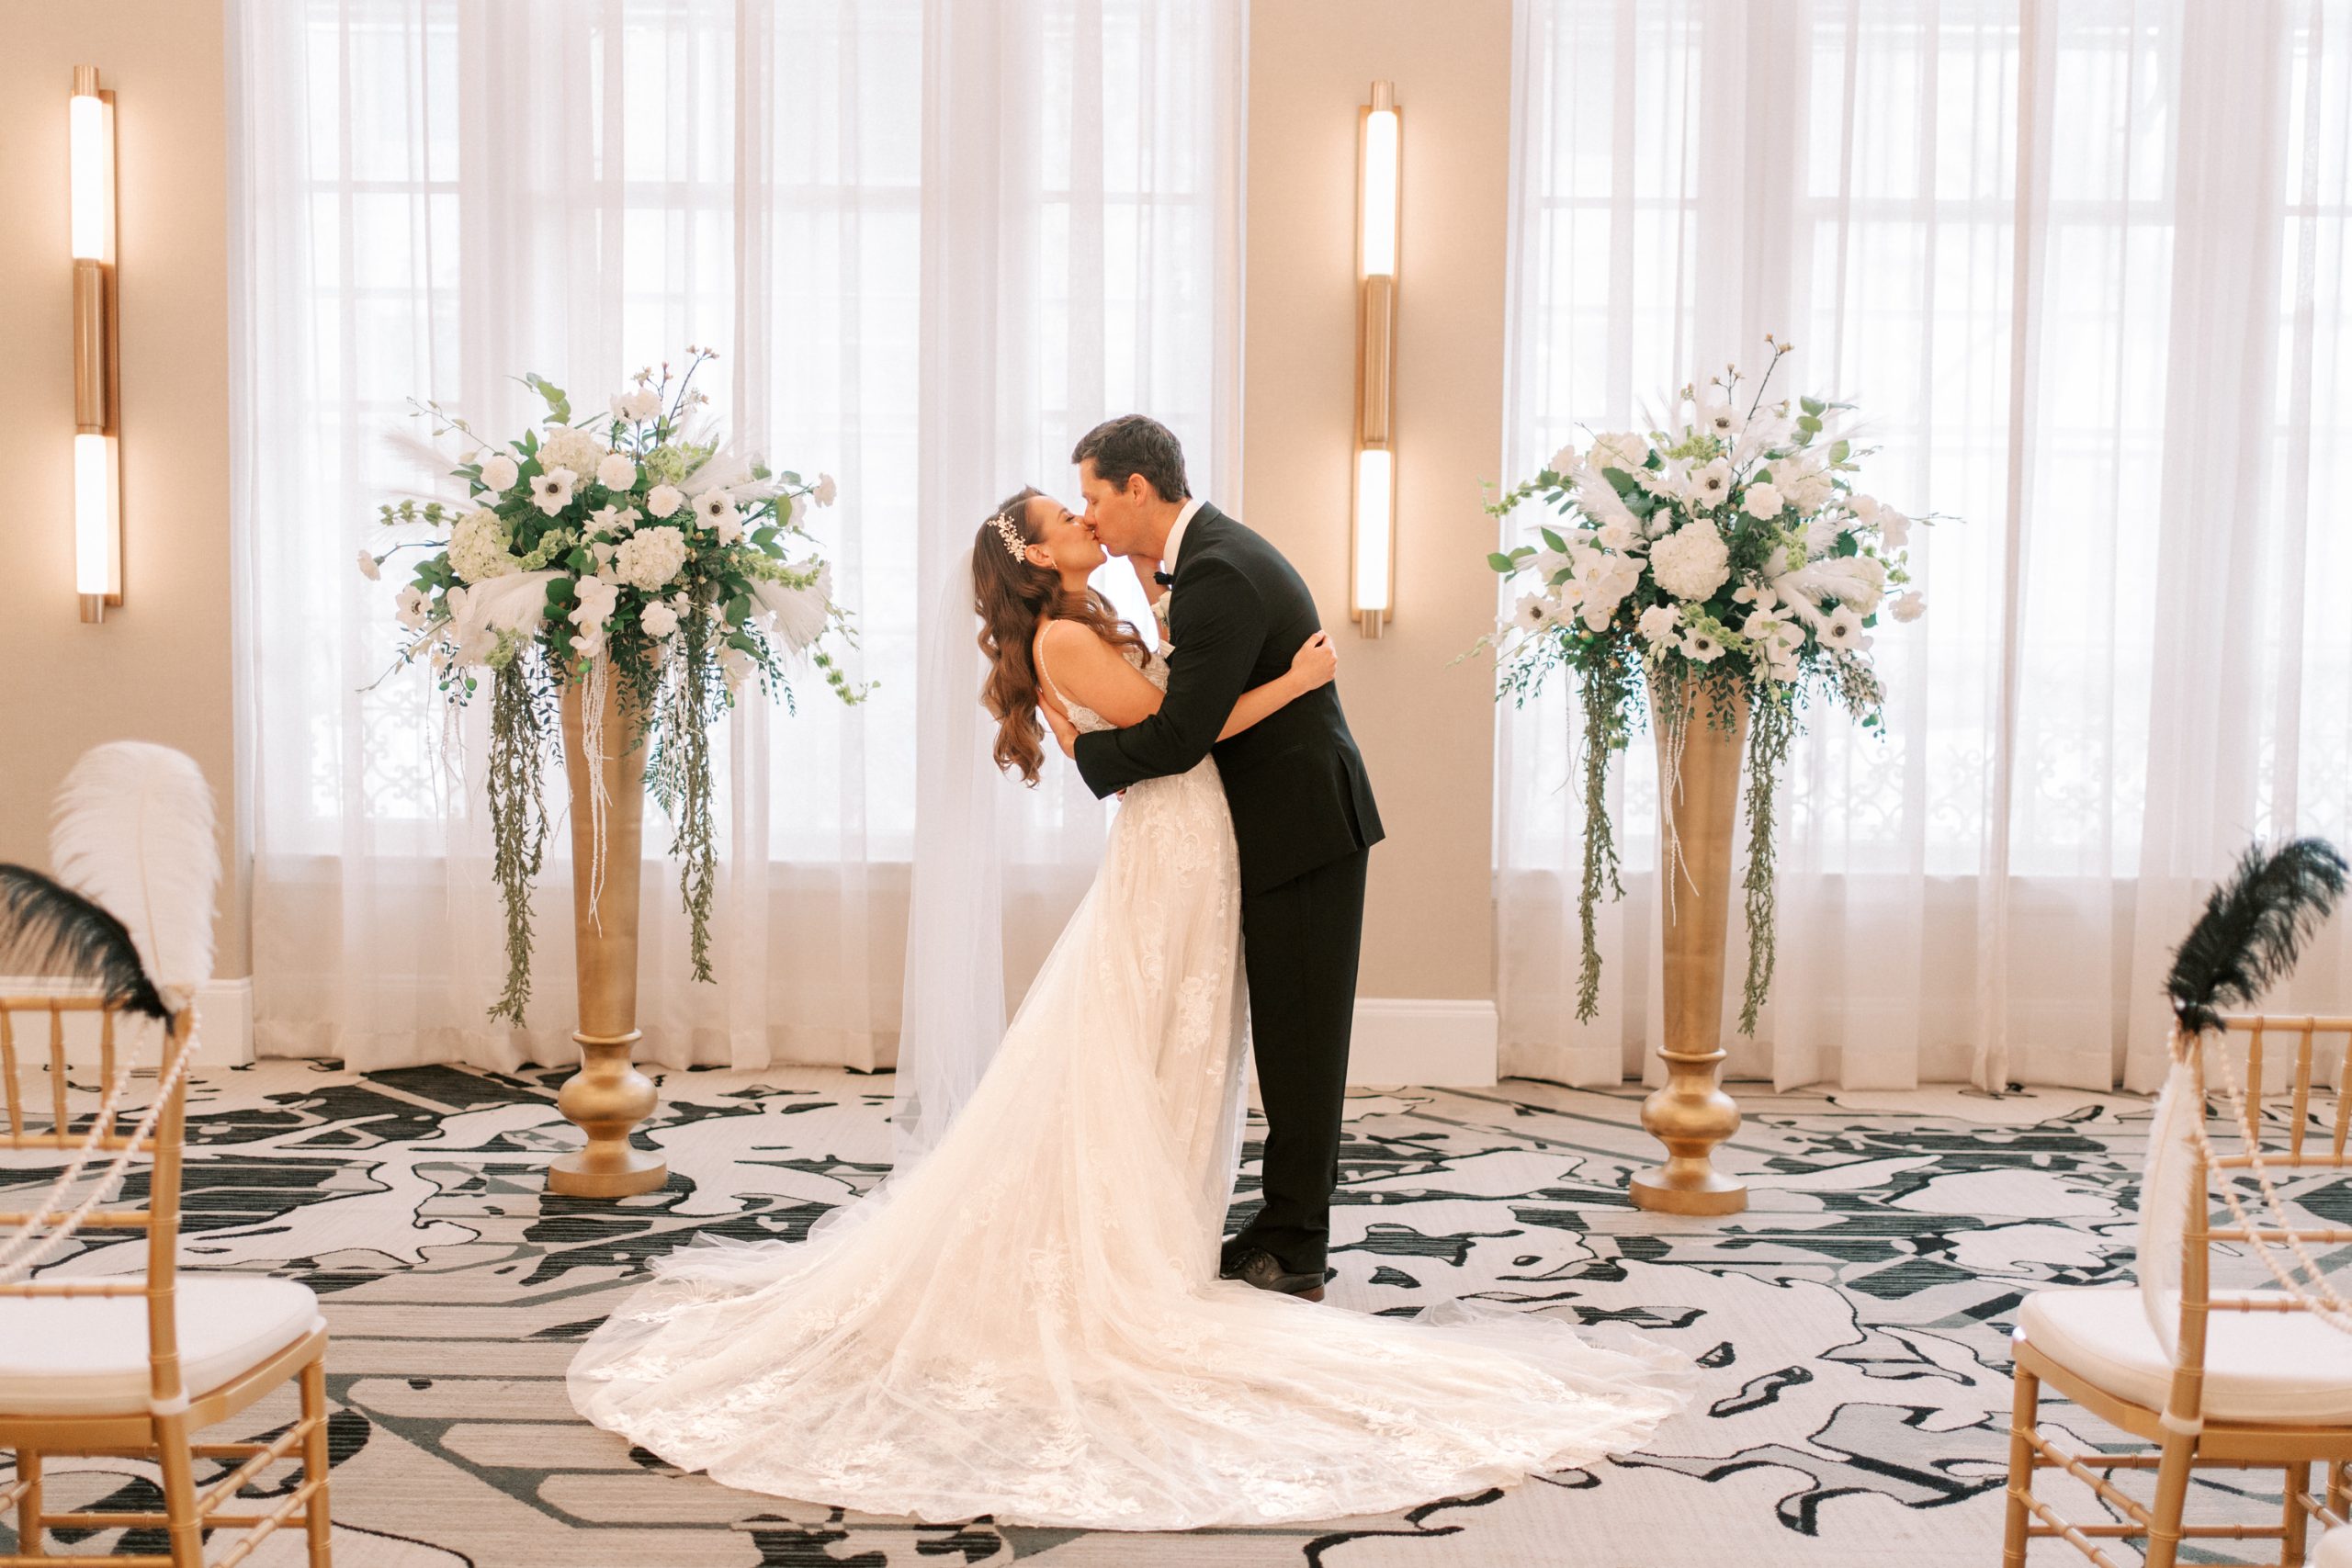 5 Reasons to Say “I Do” at Hotel Flor Tampa Downtown